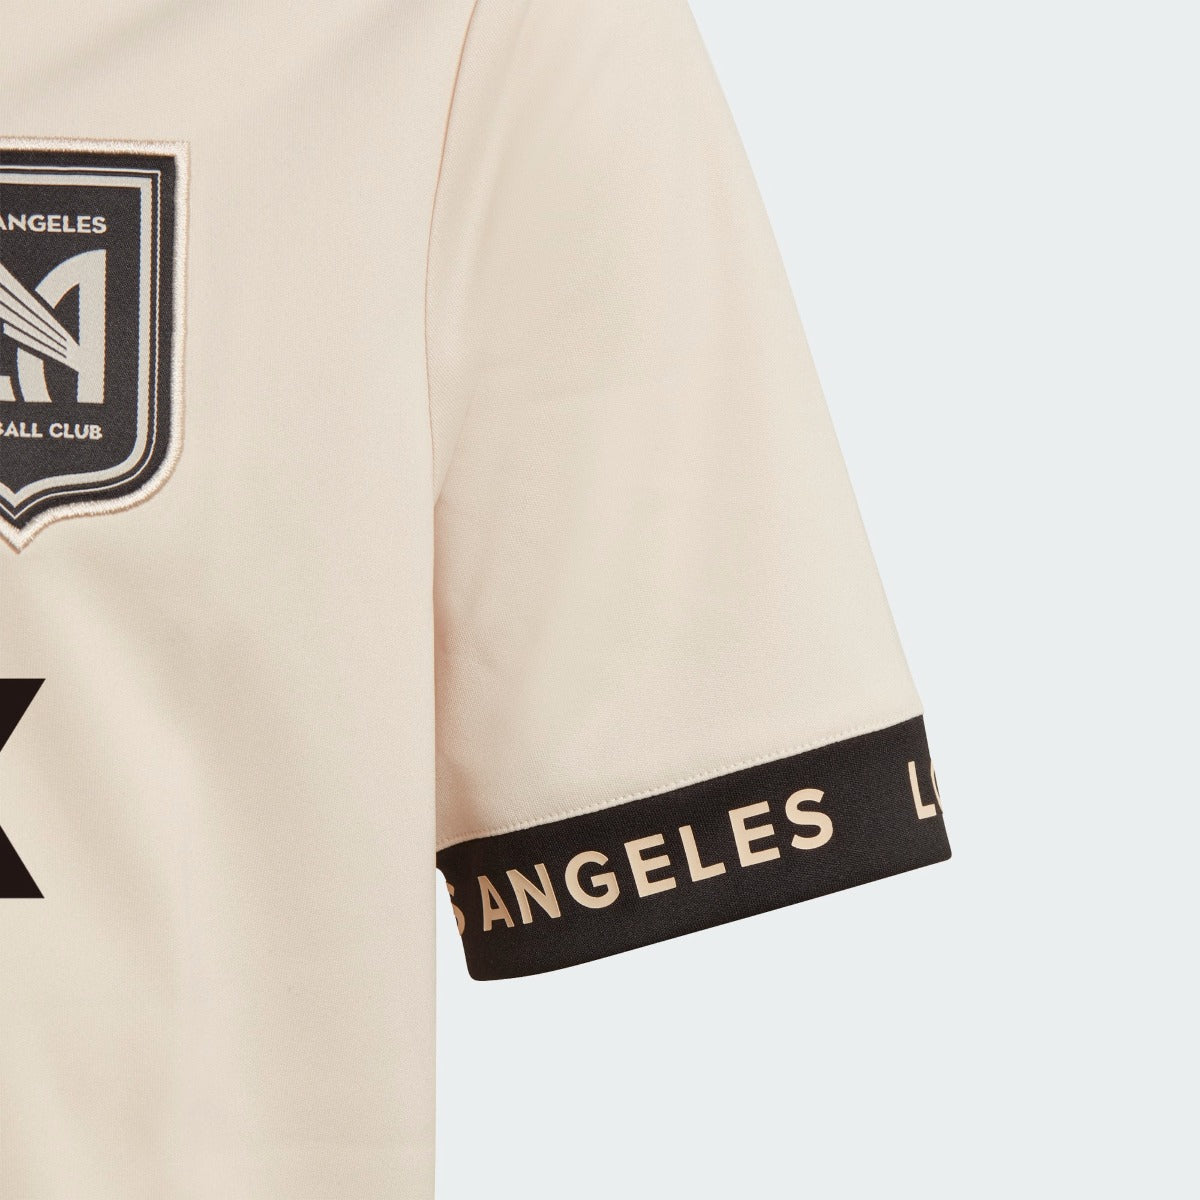 Adidas 2021-22 LAFC Youth Away Jersey - Beige-Black (Detail 2)